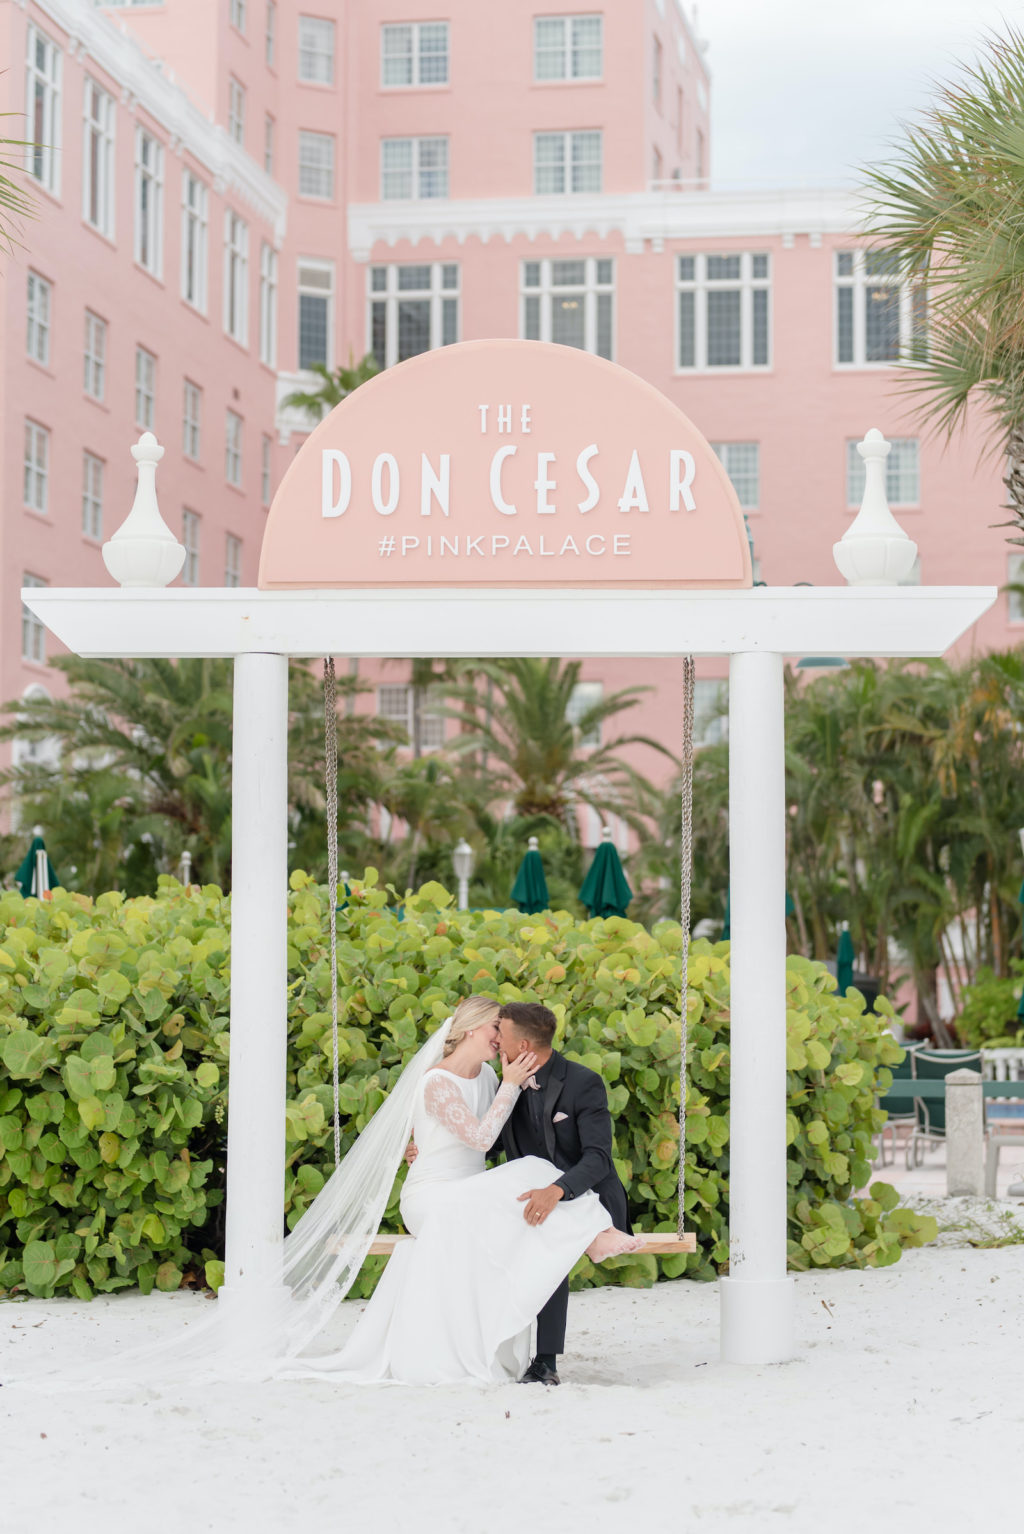 Romantic Bride and Groom on Swing on White Sand Beach of St. Petersburg Historic Wedding Venue The Pink Palace, Don Cesar | Styled Shoot